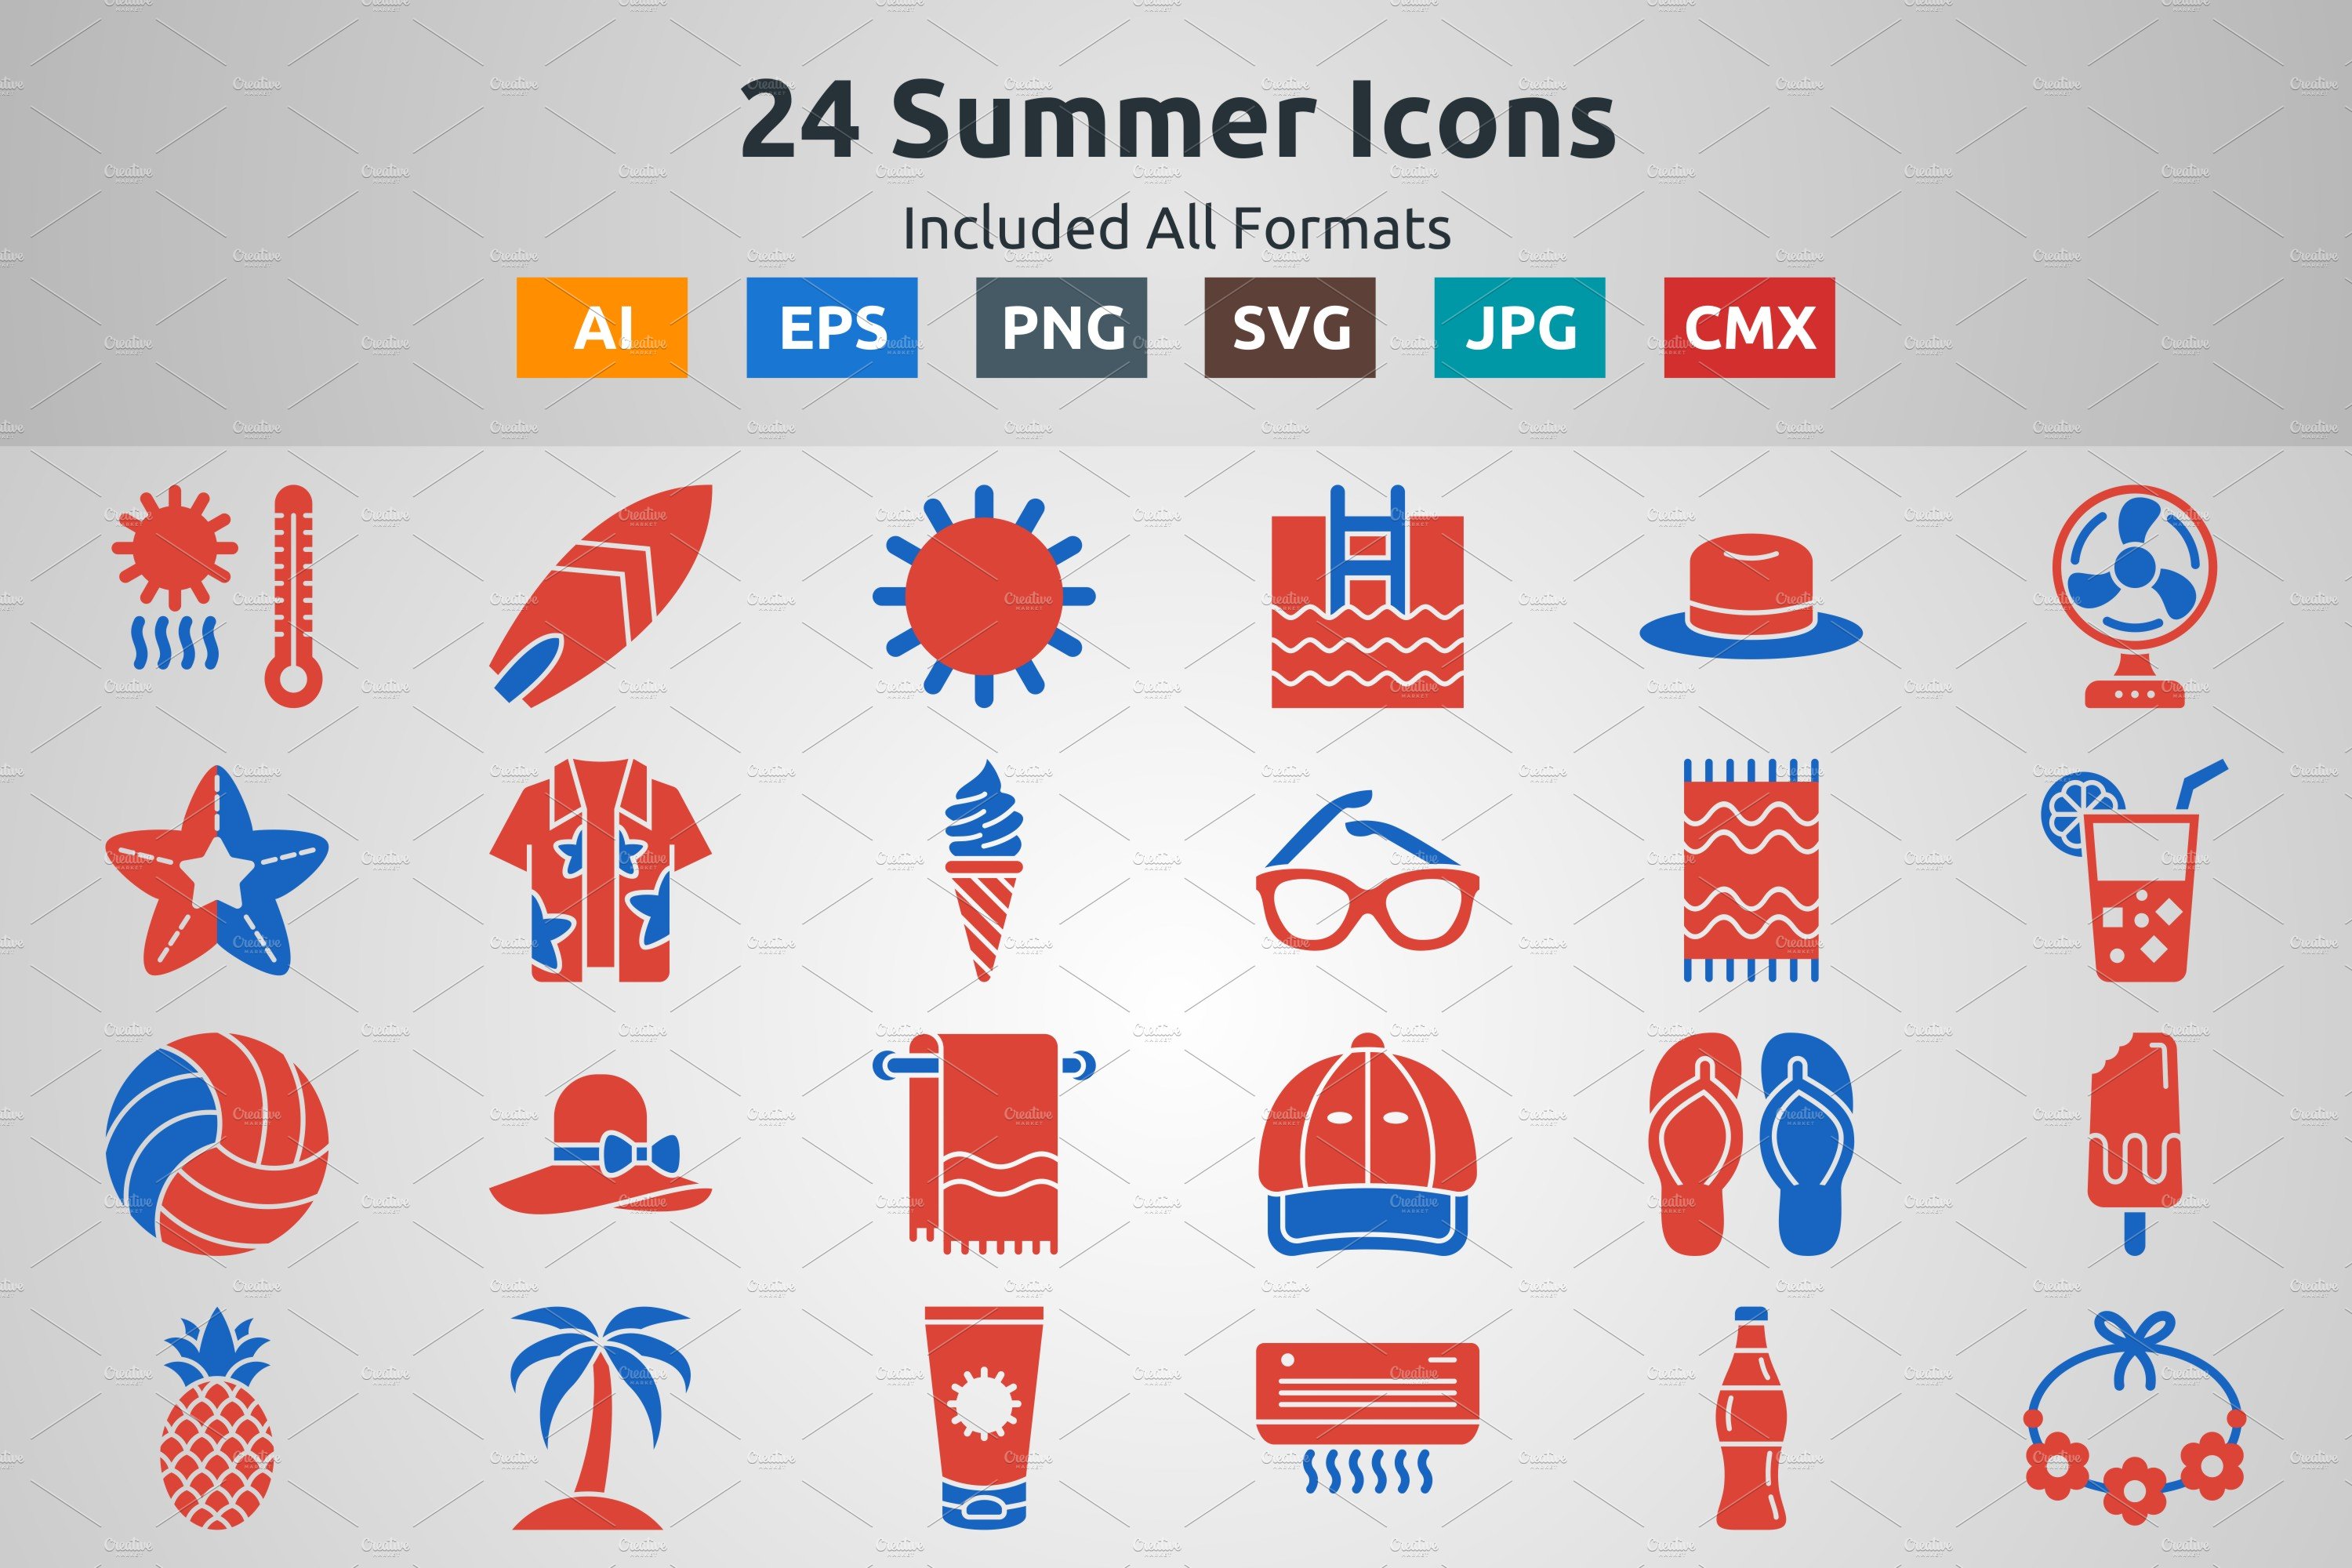 Glyph Two Color Summer Icons cover image.